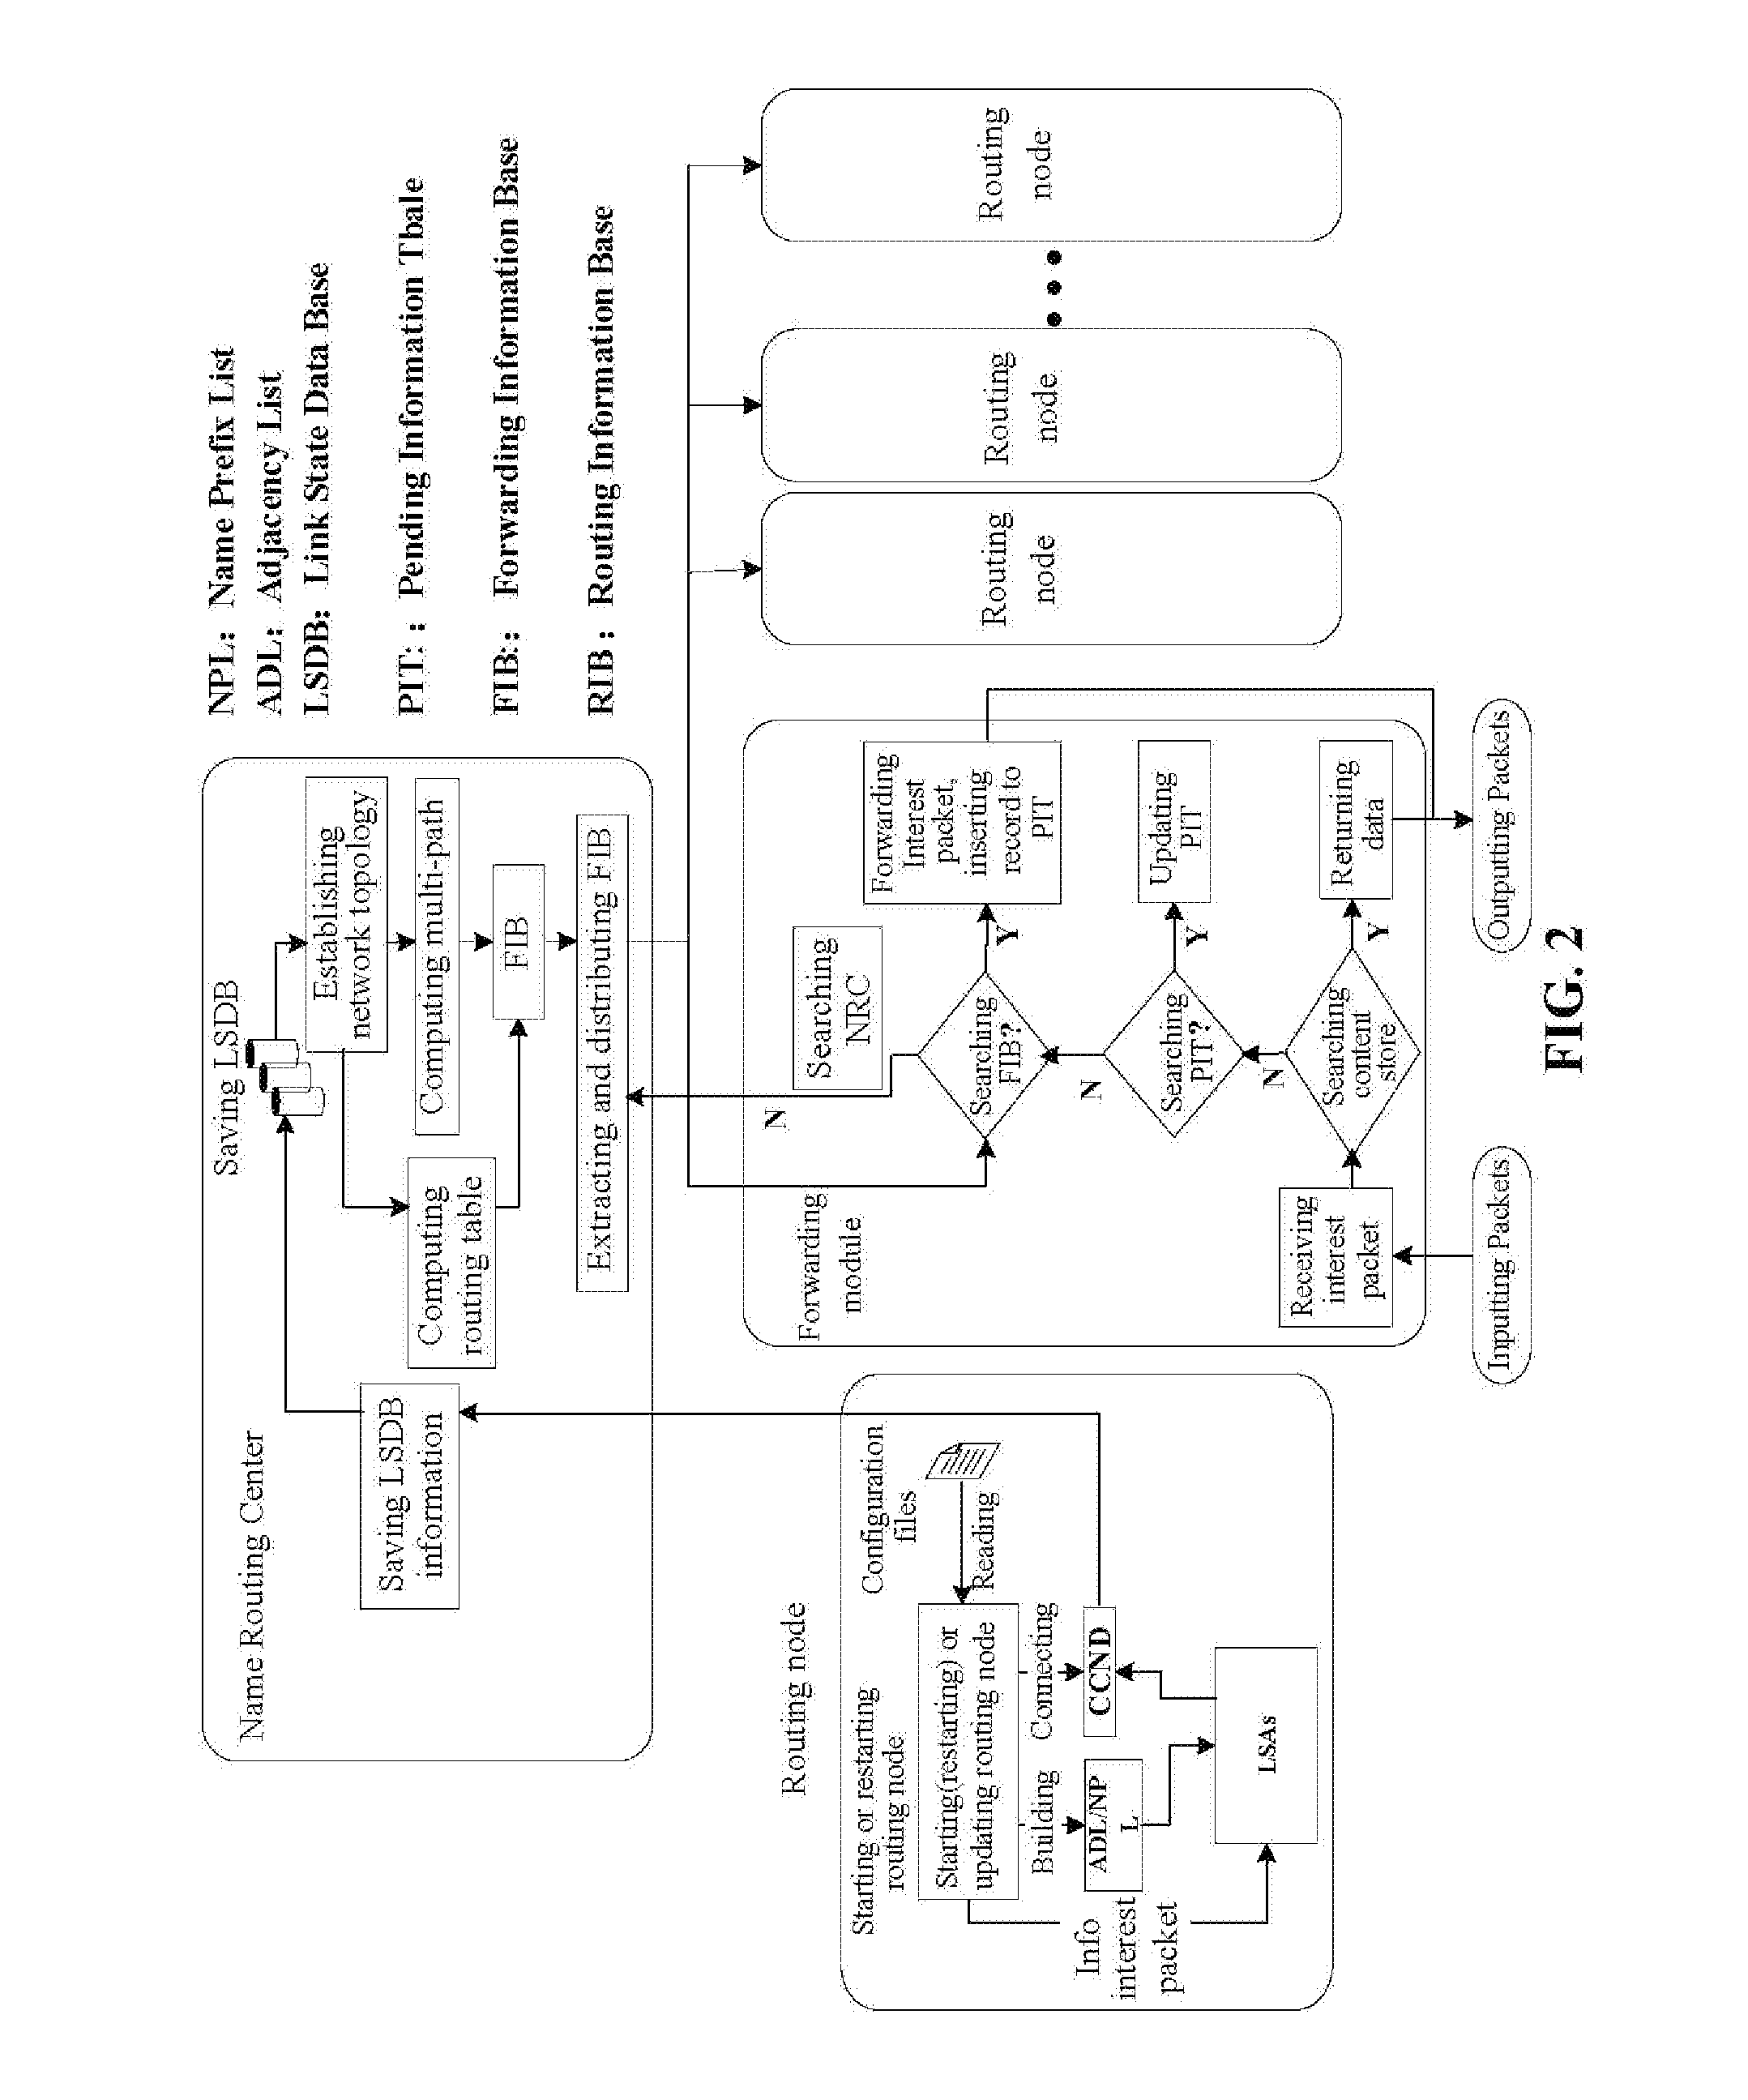 Content-based routing method and system